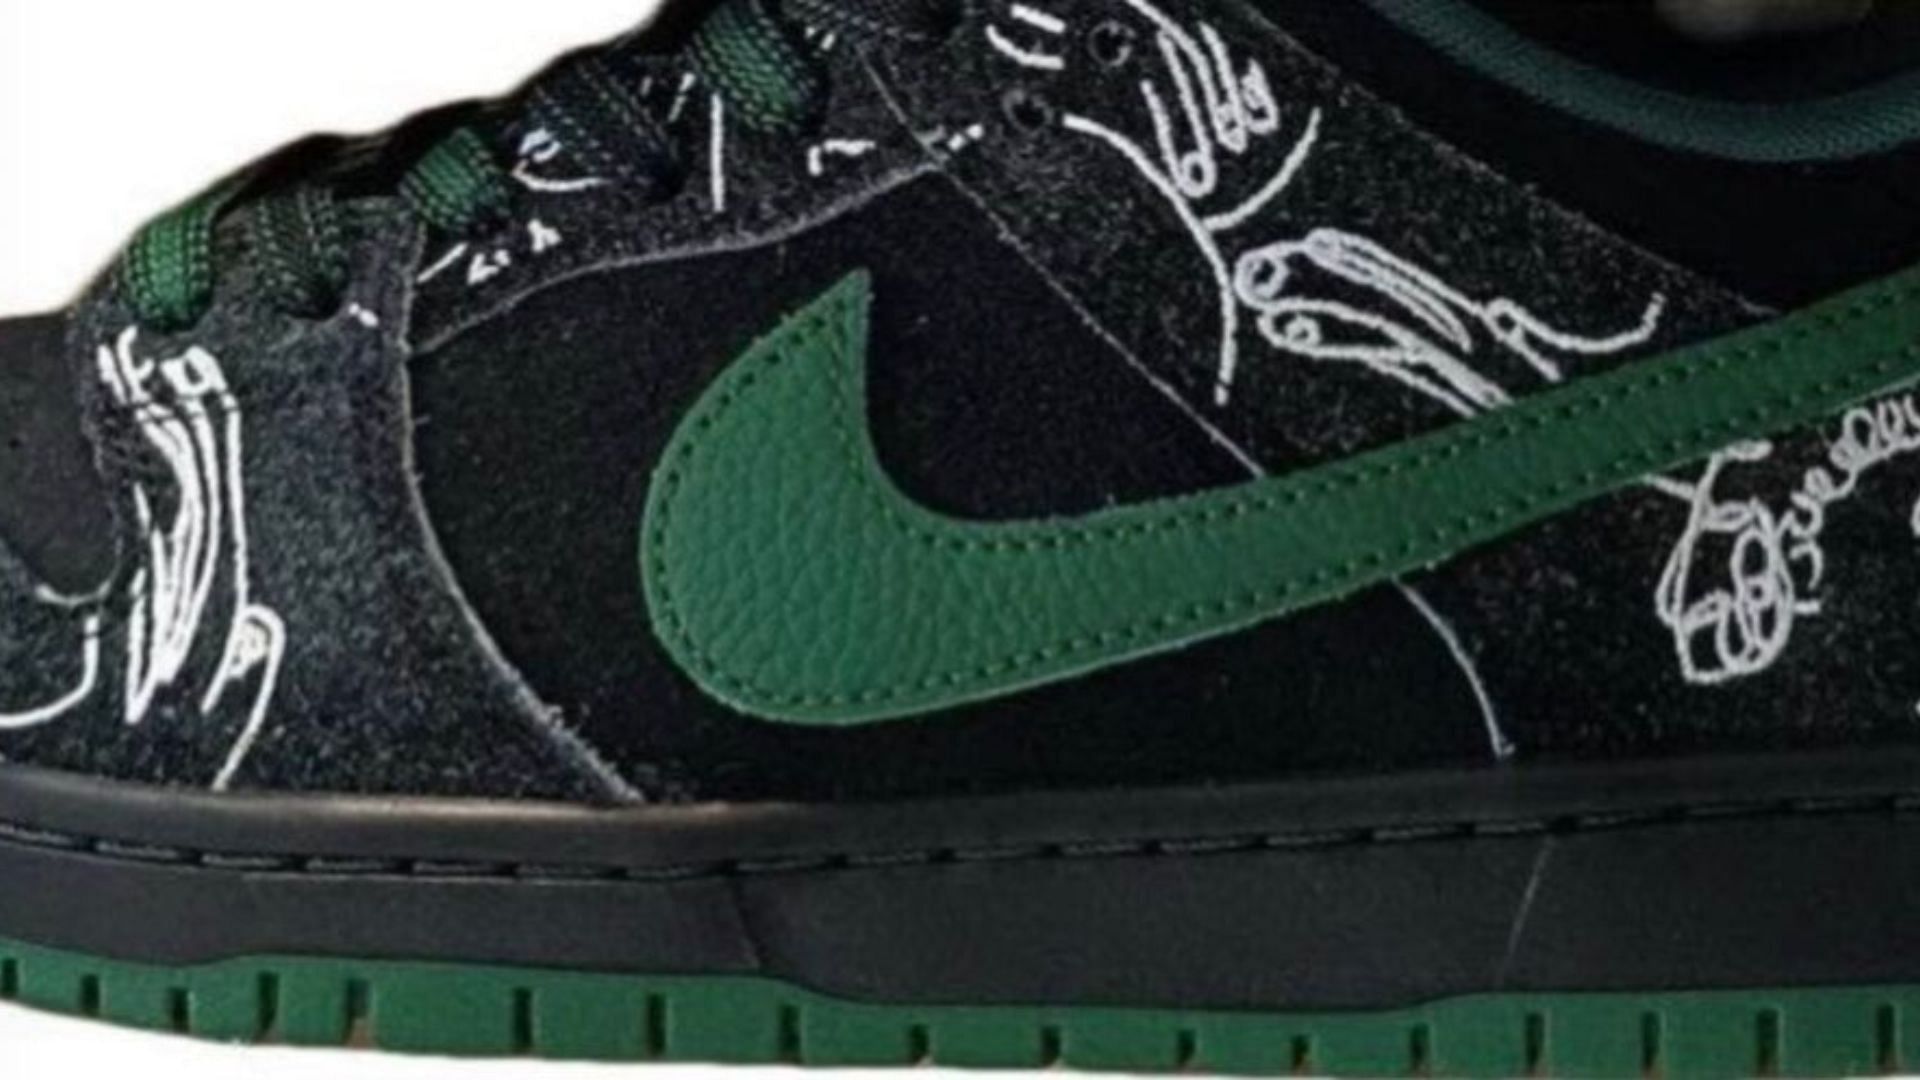 There Skateboards x Nike SB Dunk Low sneakers